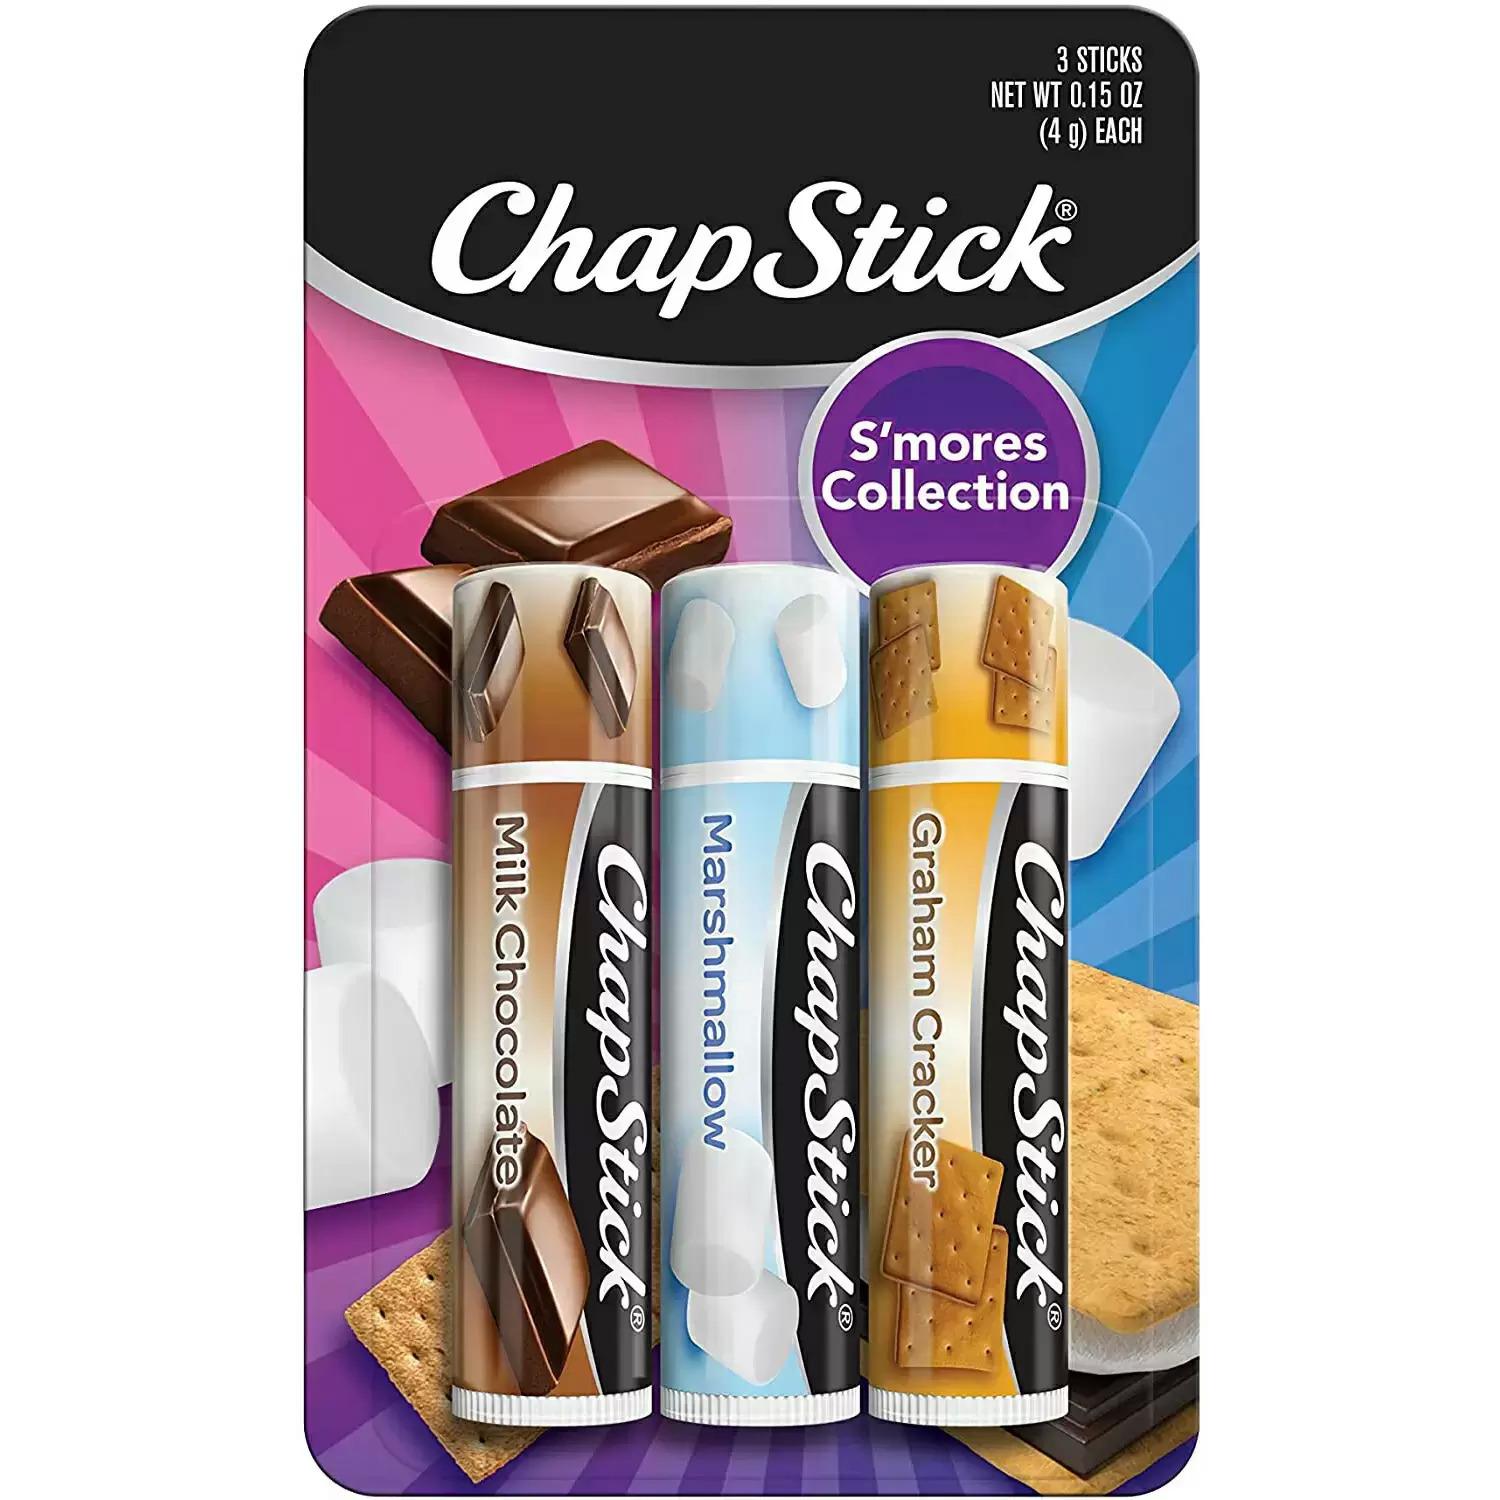 3 ChapStick Smores Collection for $1.71 Shipped